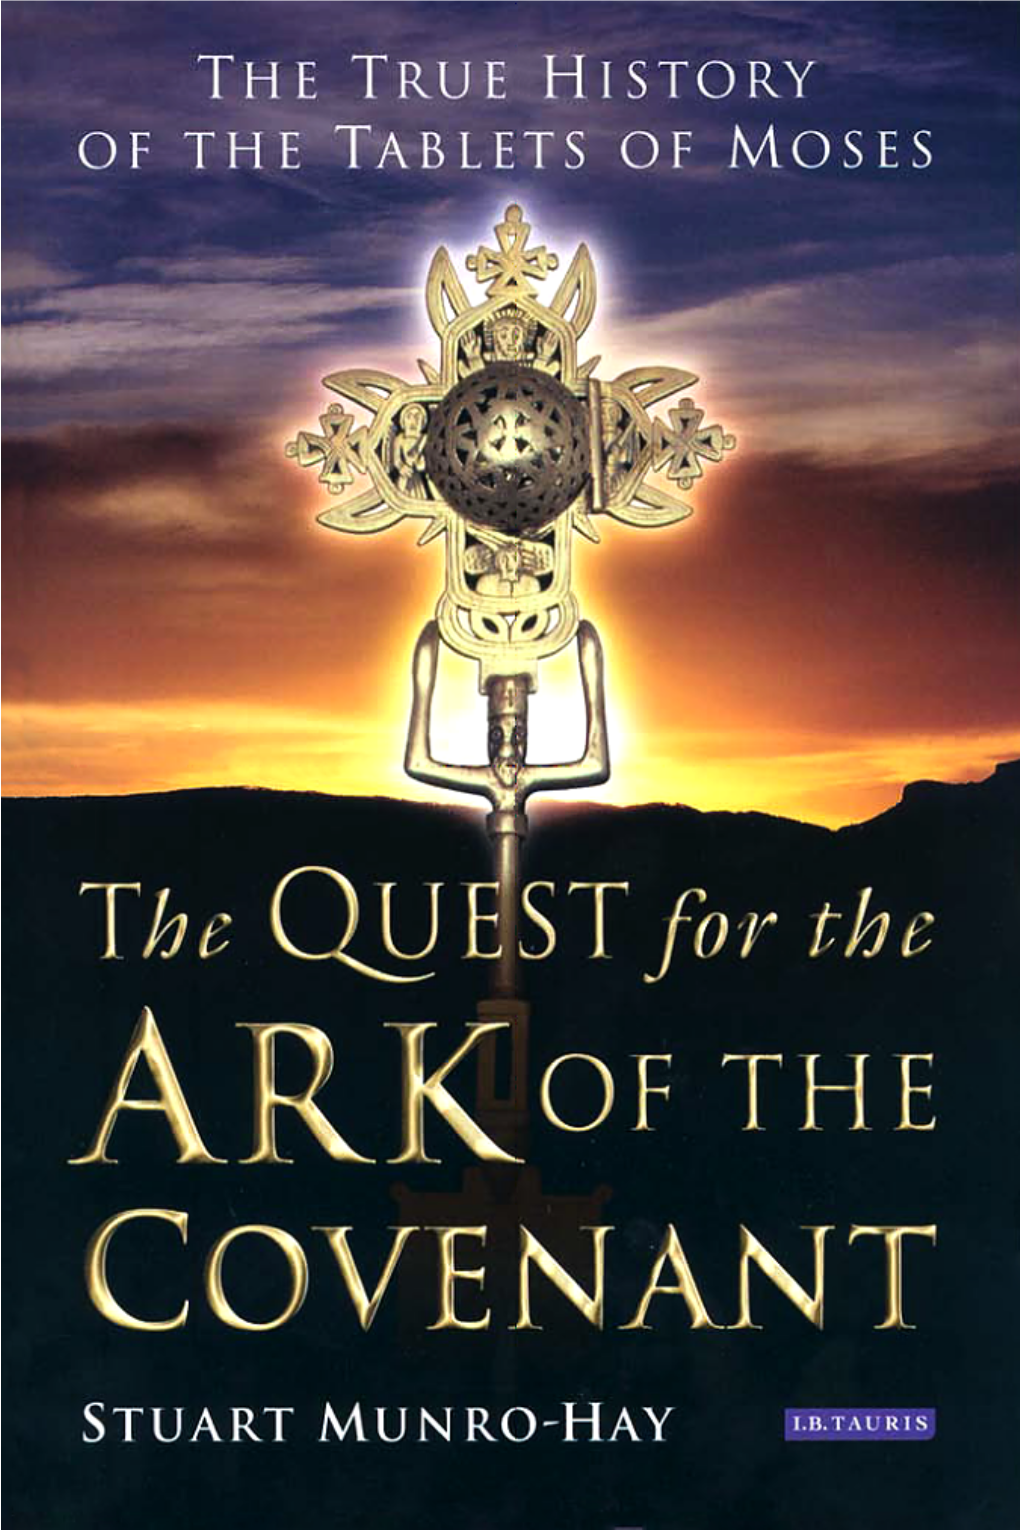 The QUEST for the ARK of the COVENANT As This Book Was Going to Press the Publishers Received the Sad News of the Death of the Author, Stuart Munro- Hay